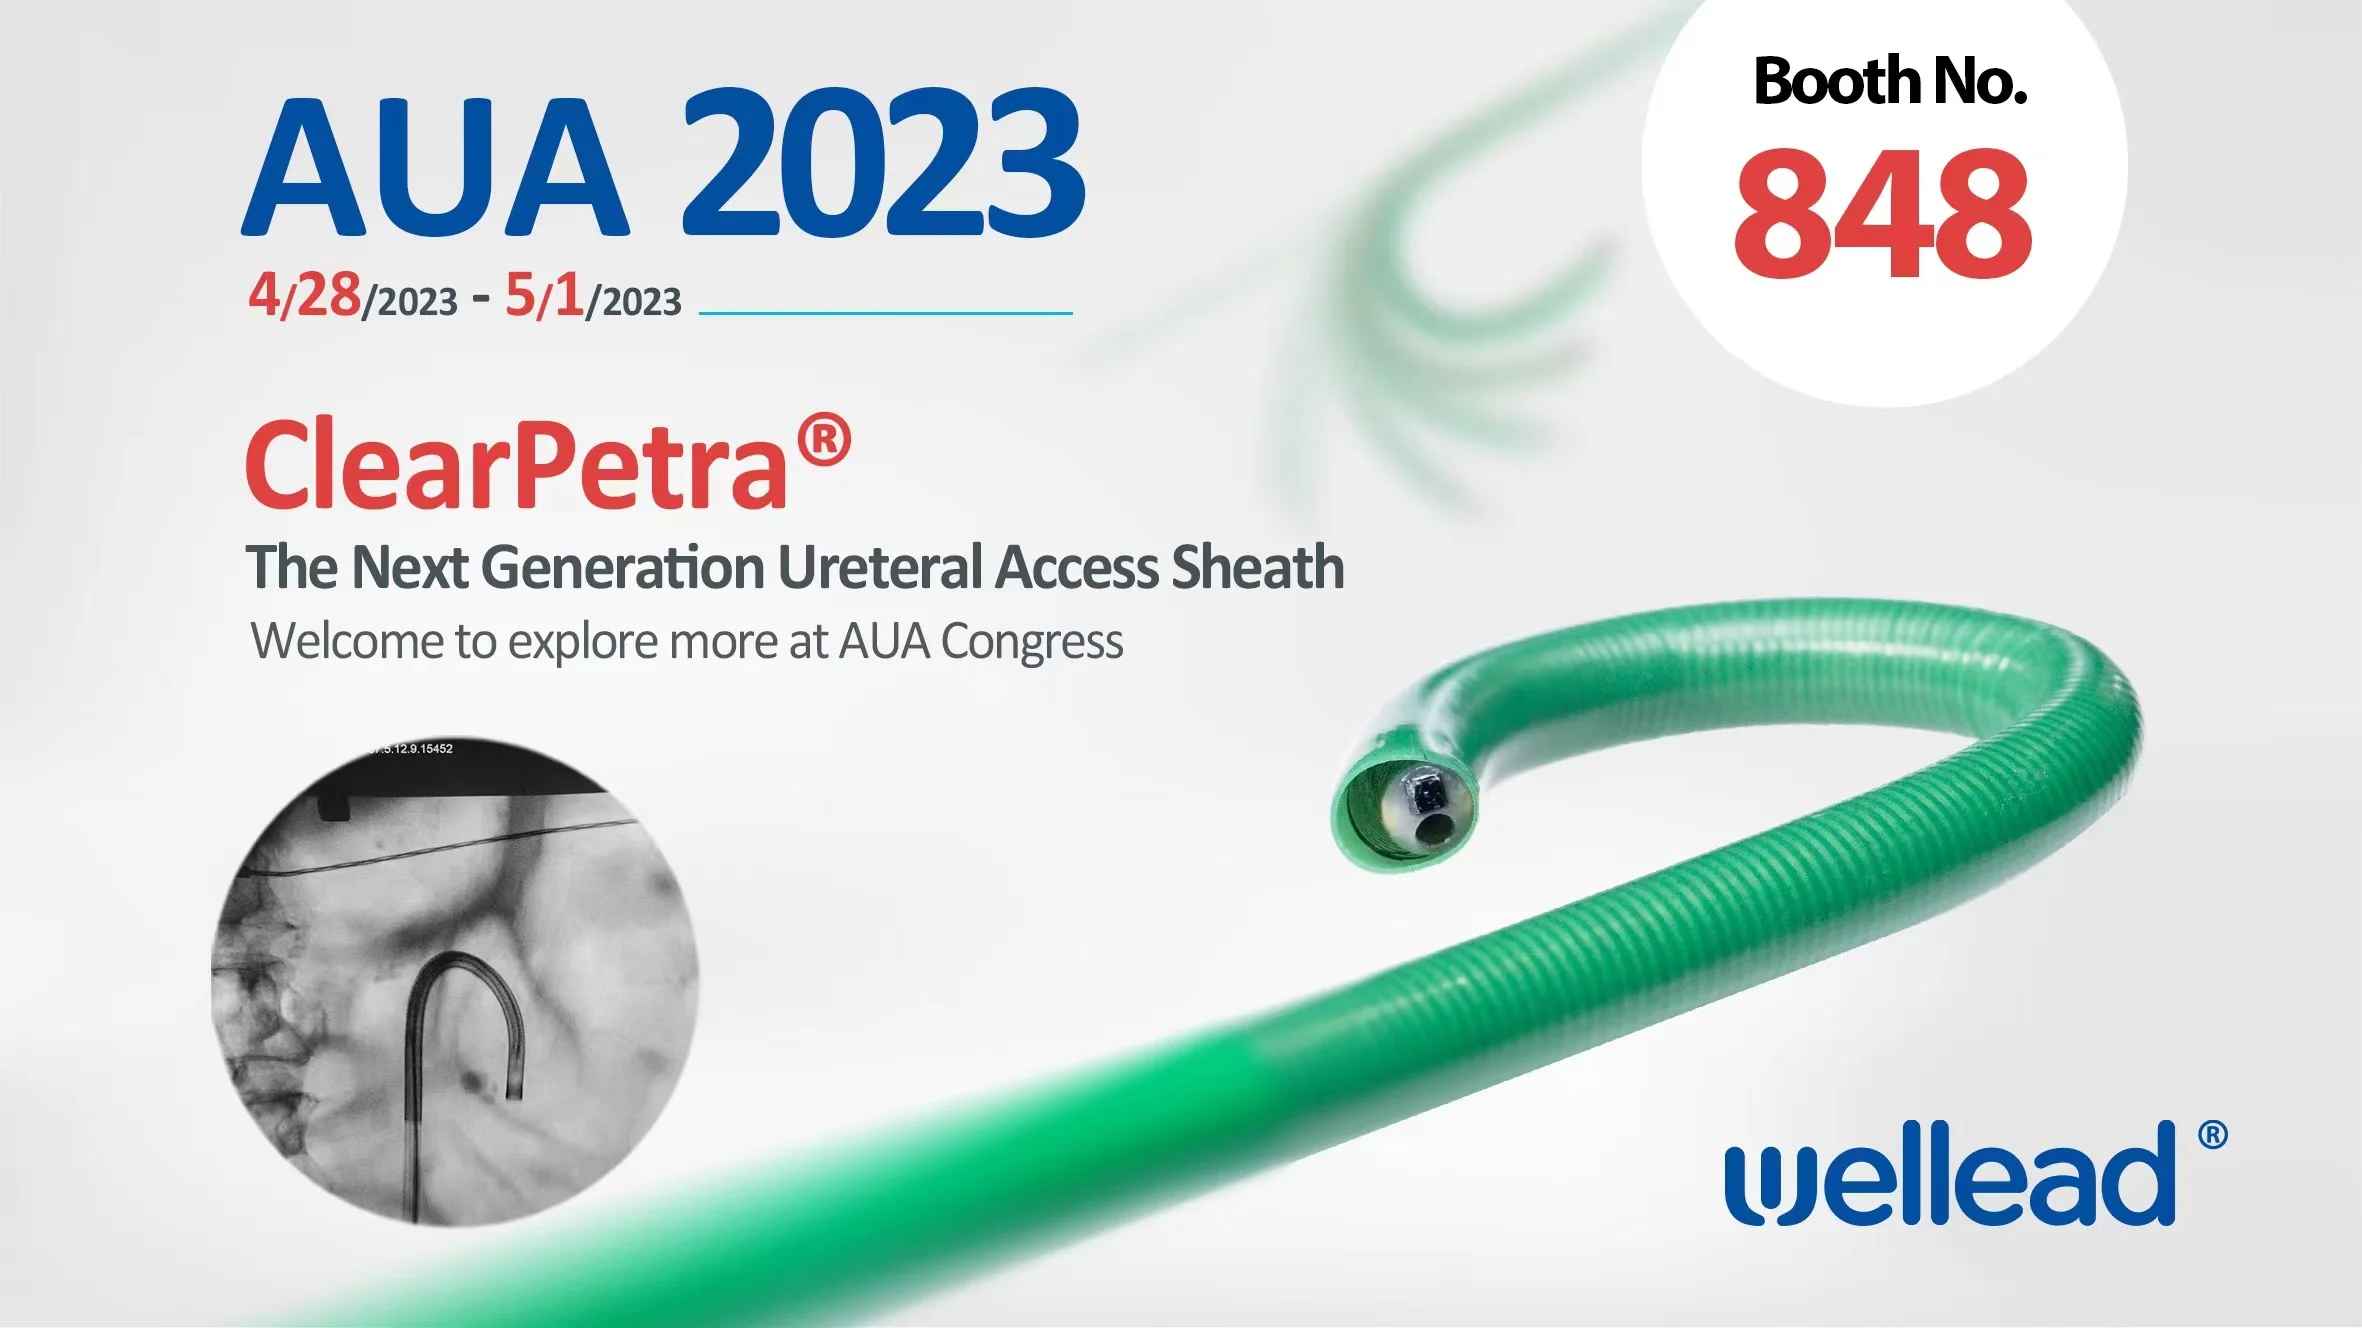 Join Well Lead at AUA 2023 – ClearPetra The Next Generation Ureteral Access Sheath(图2)